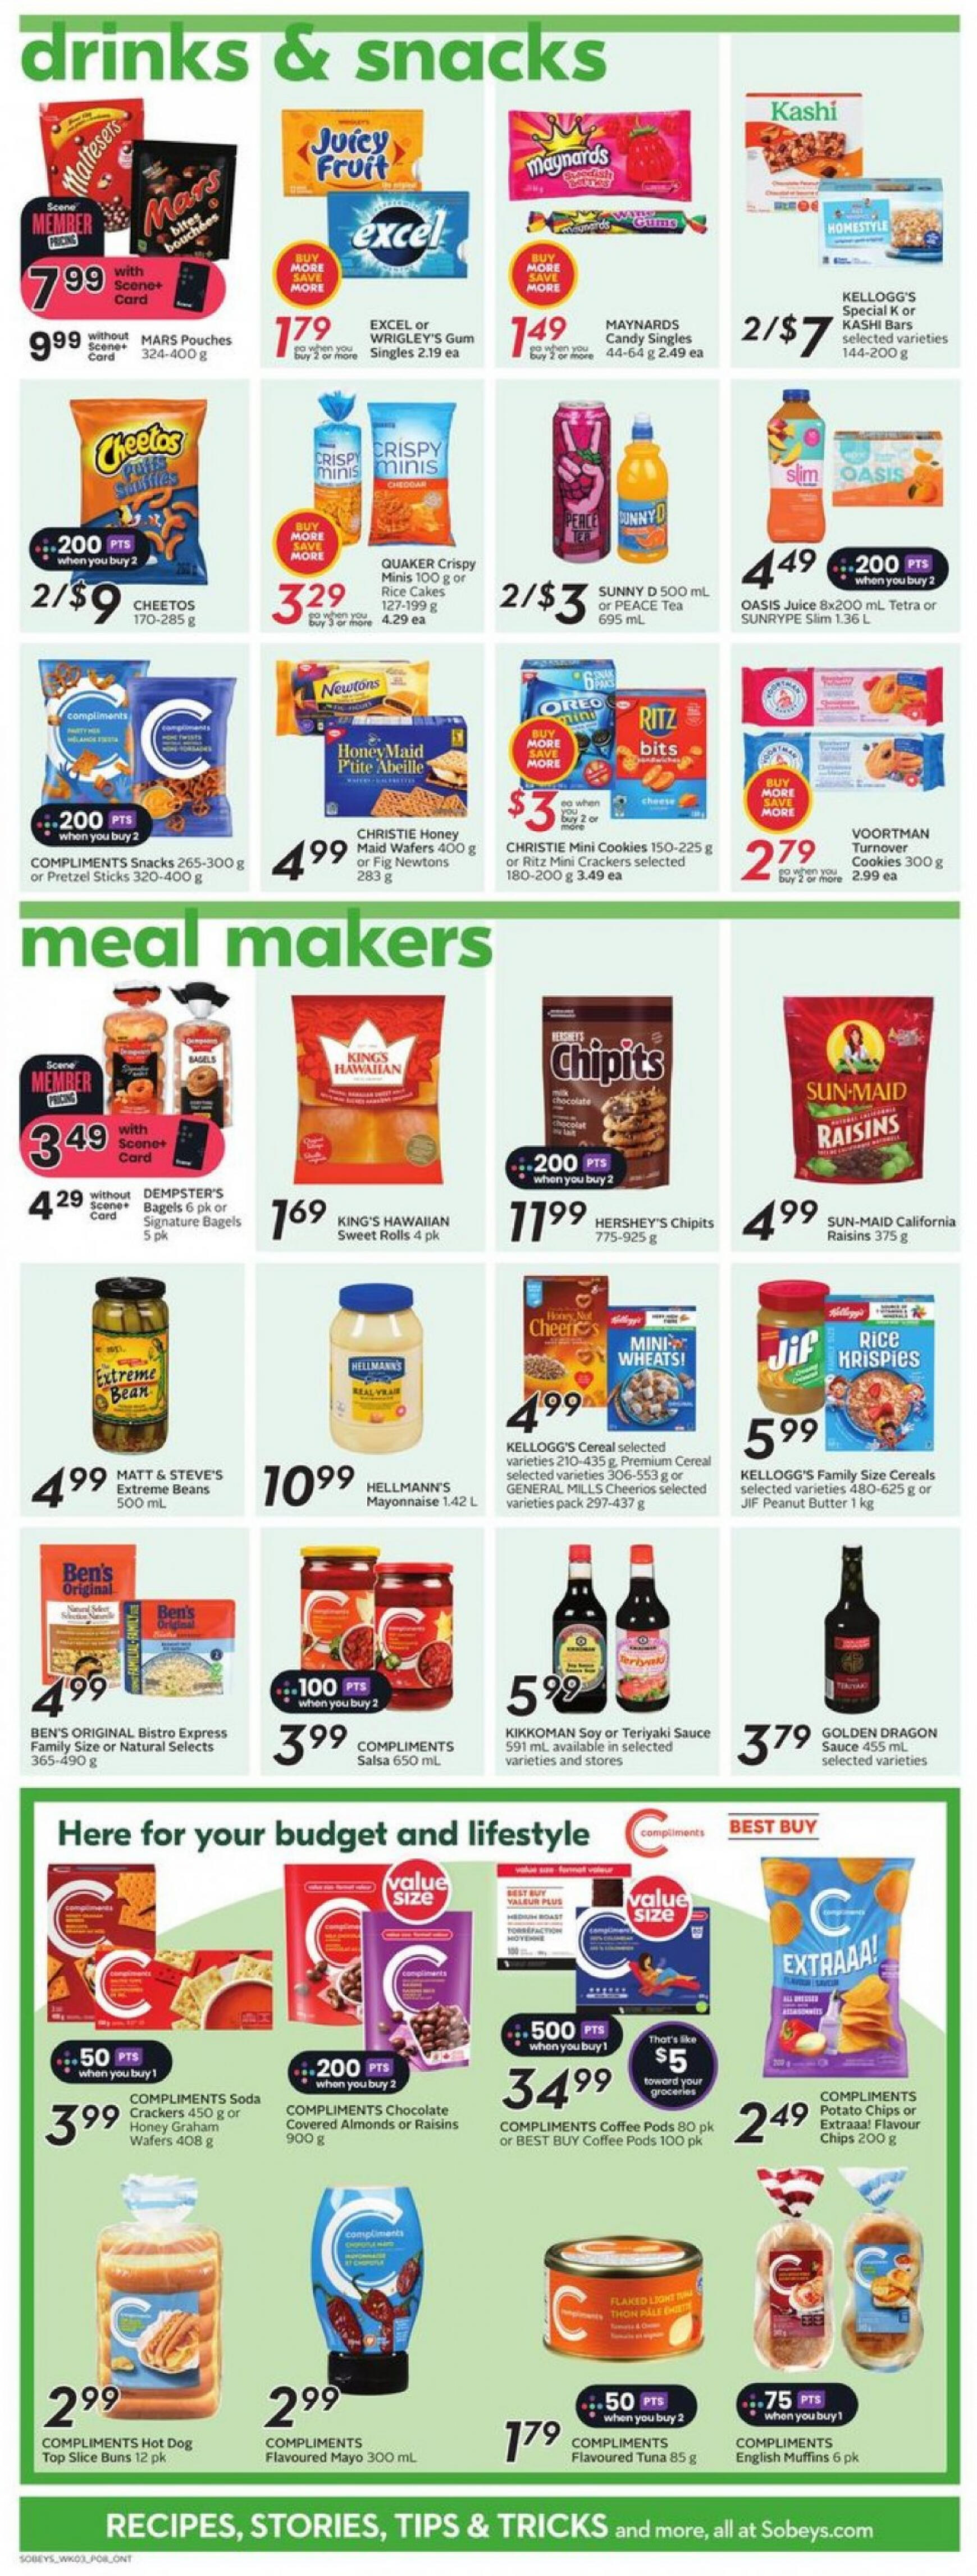 sobeys - Sobeys - Weekly Flyer - Ontario flyer current 16.05. - 22.05. - page: 16